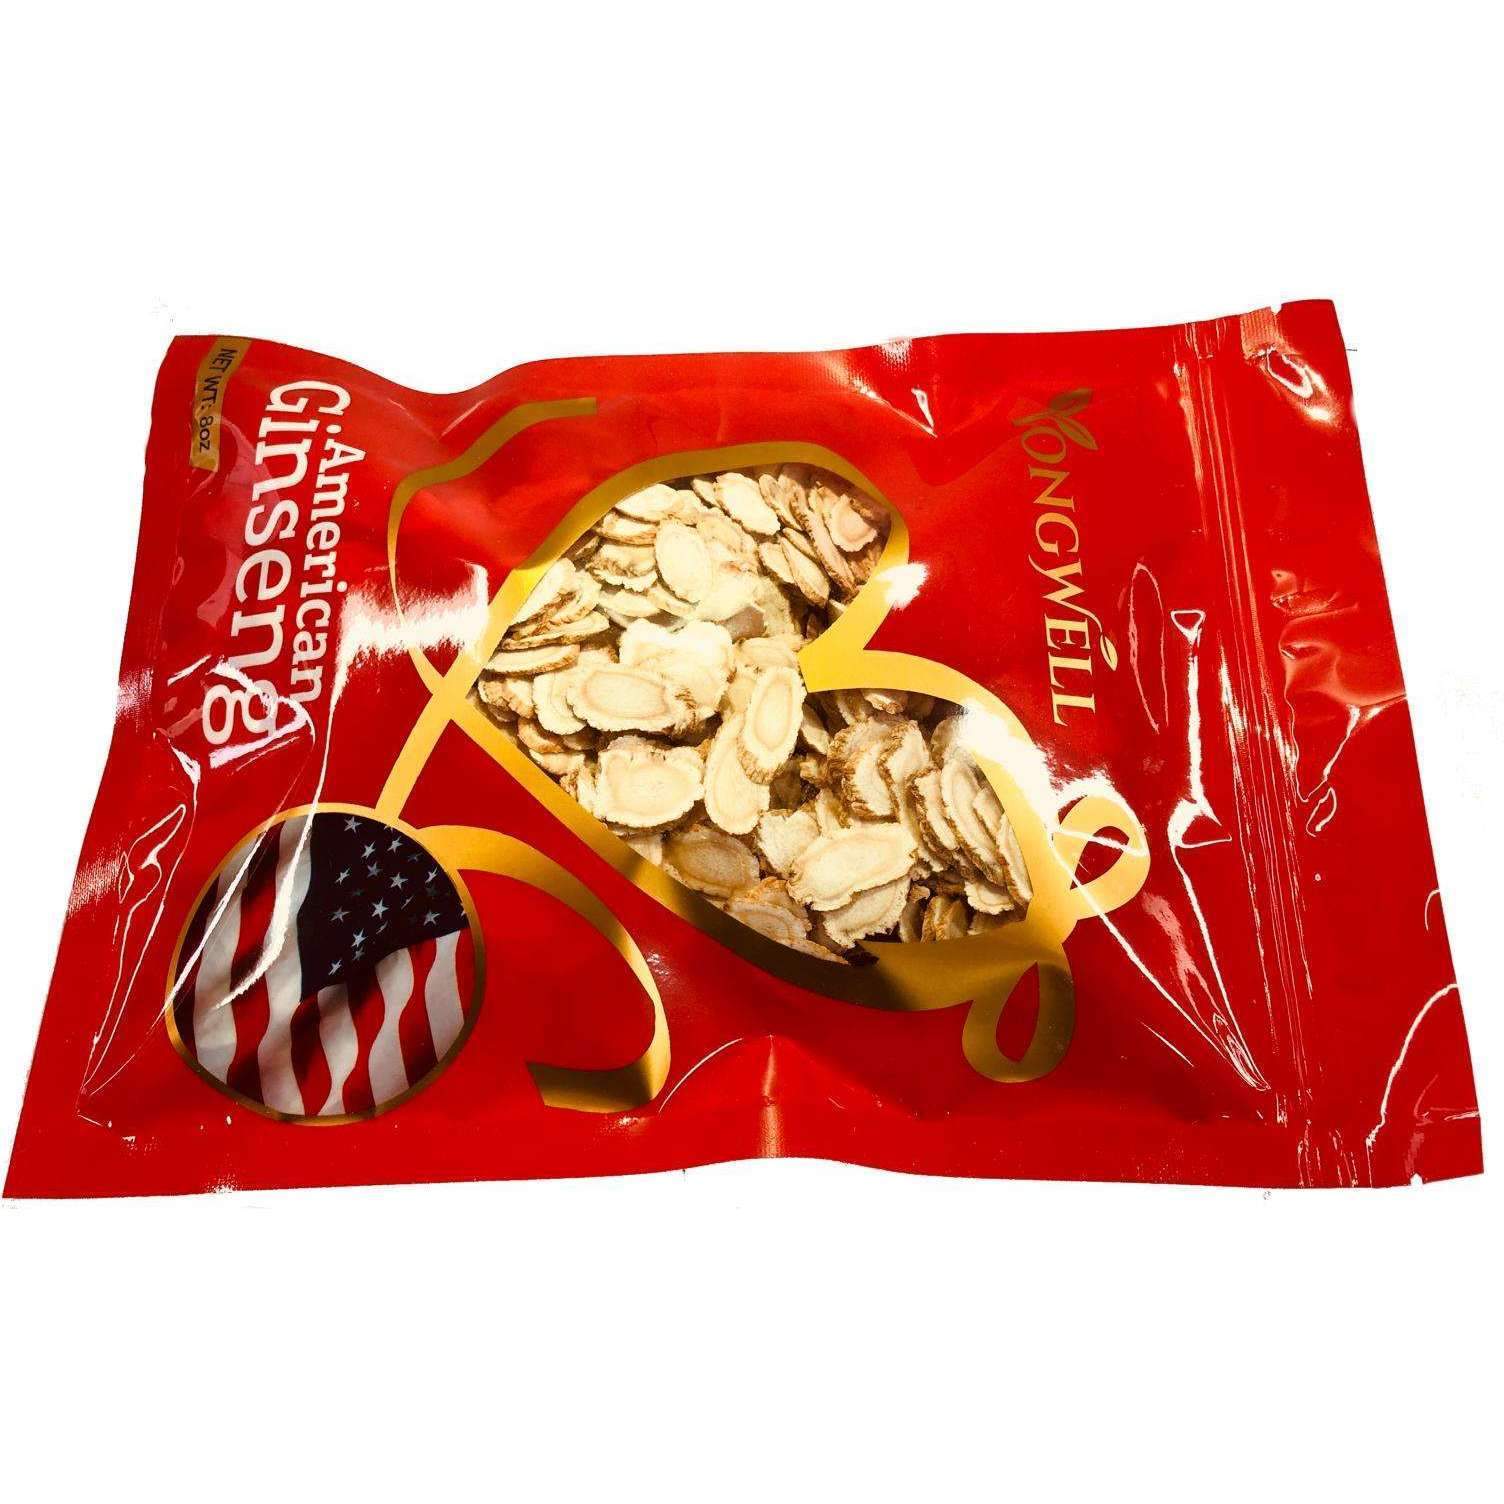 Hand-selected A Grade American Ginseng Slices - Medium Size (Gift Bag） - Buy at New Green Nutrition